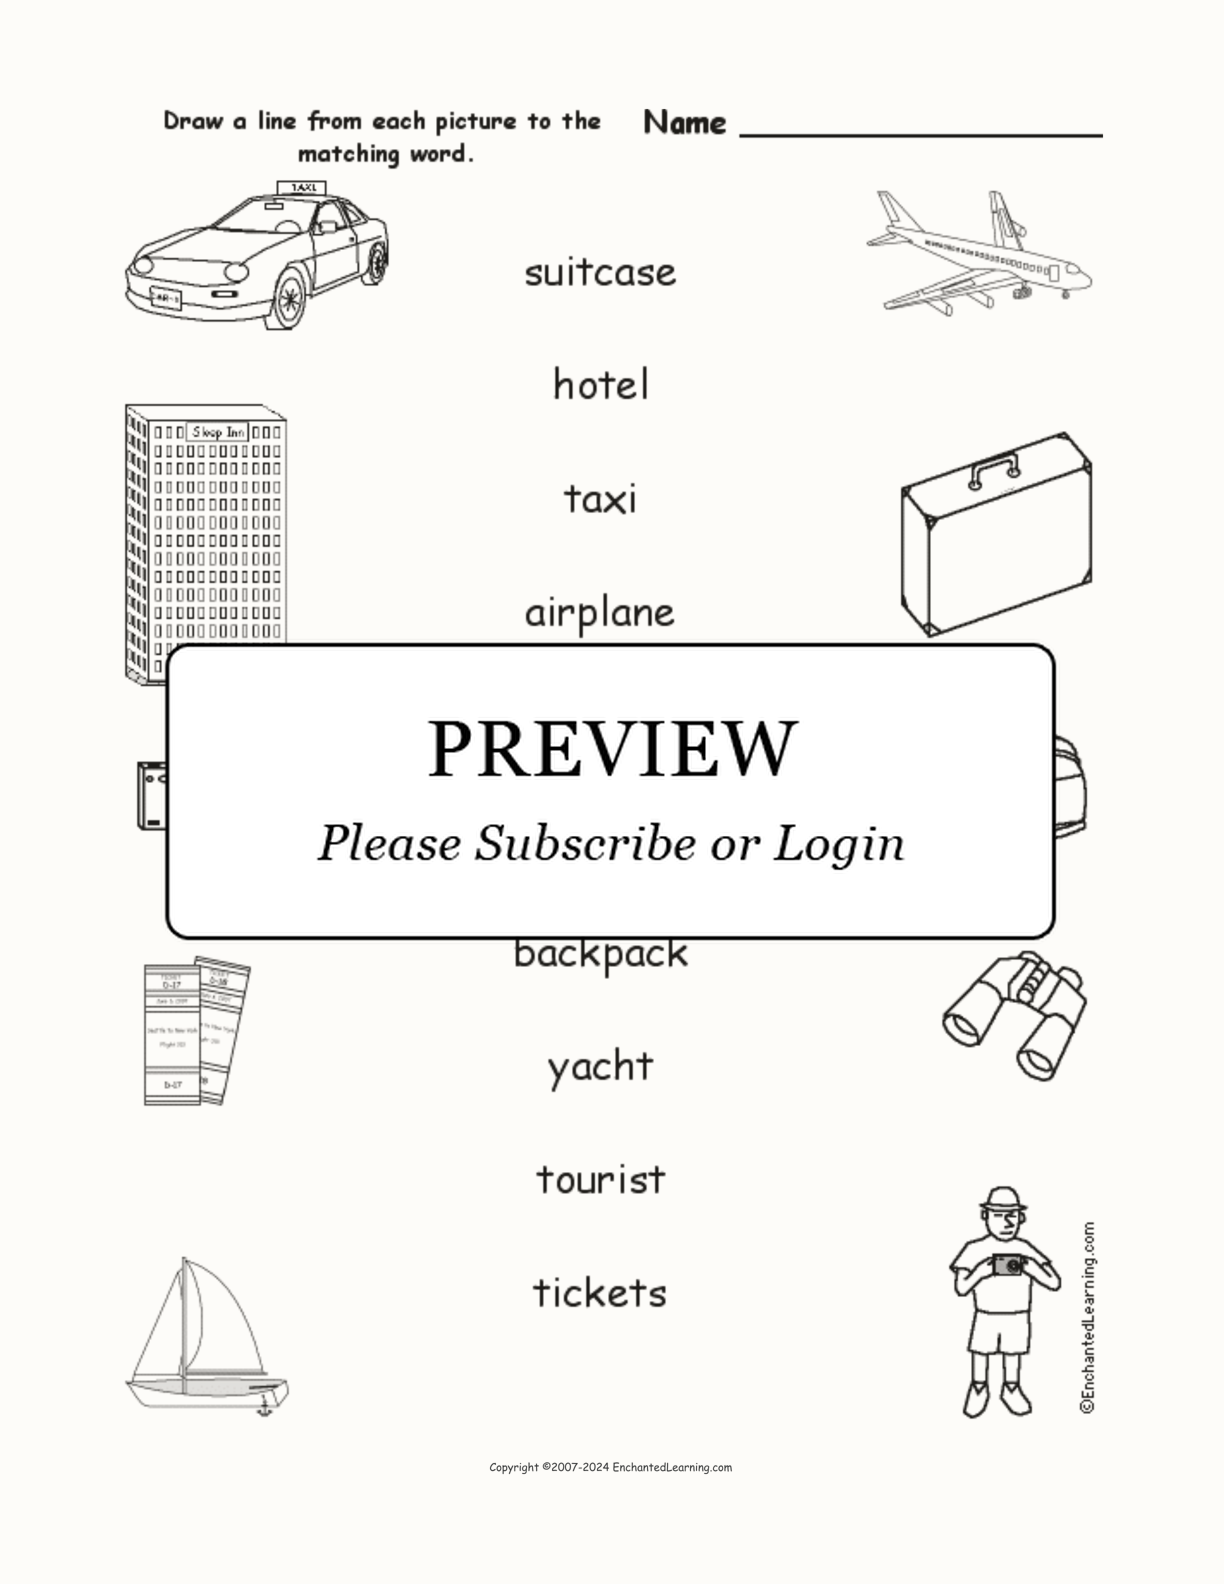 Matching Vacation Words to Pictures interactive worksheet page 1